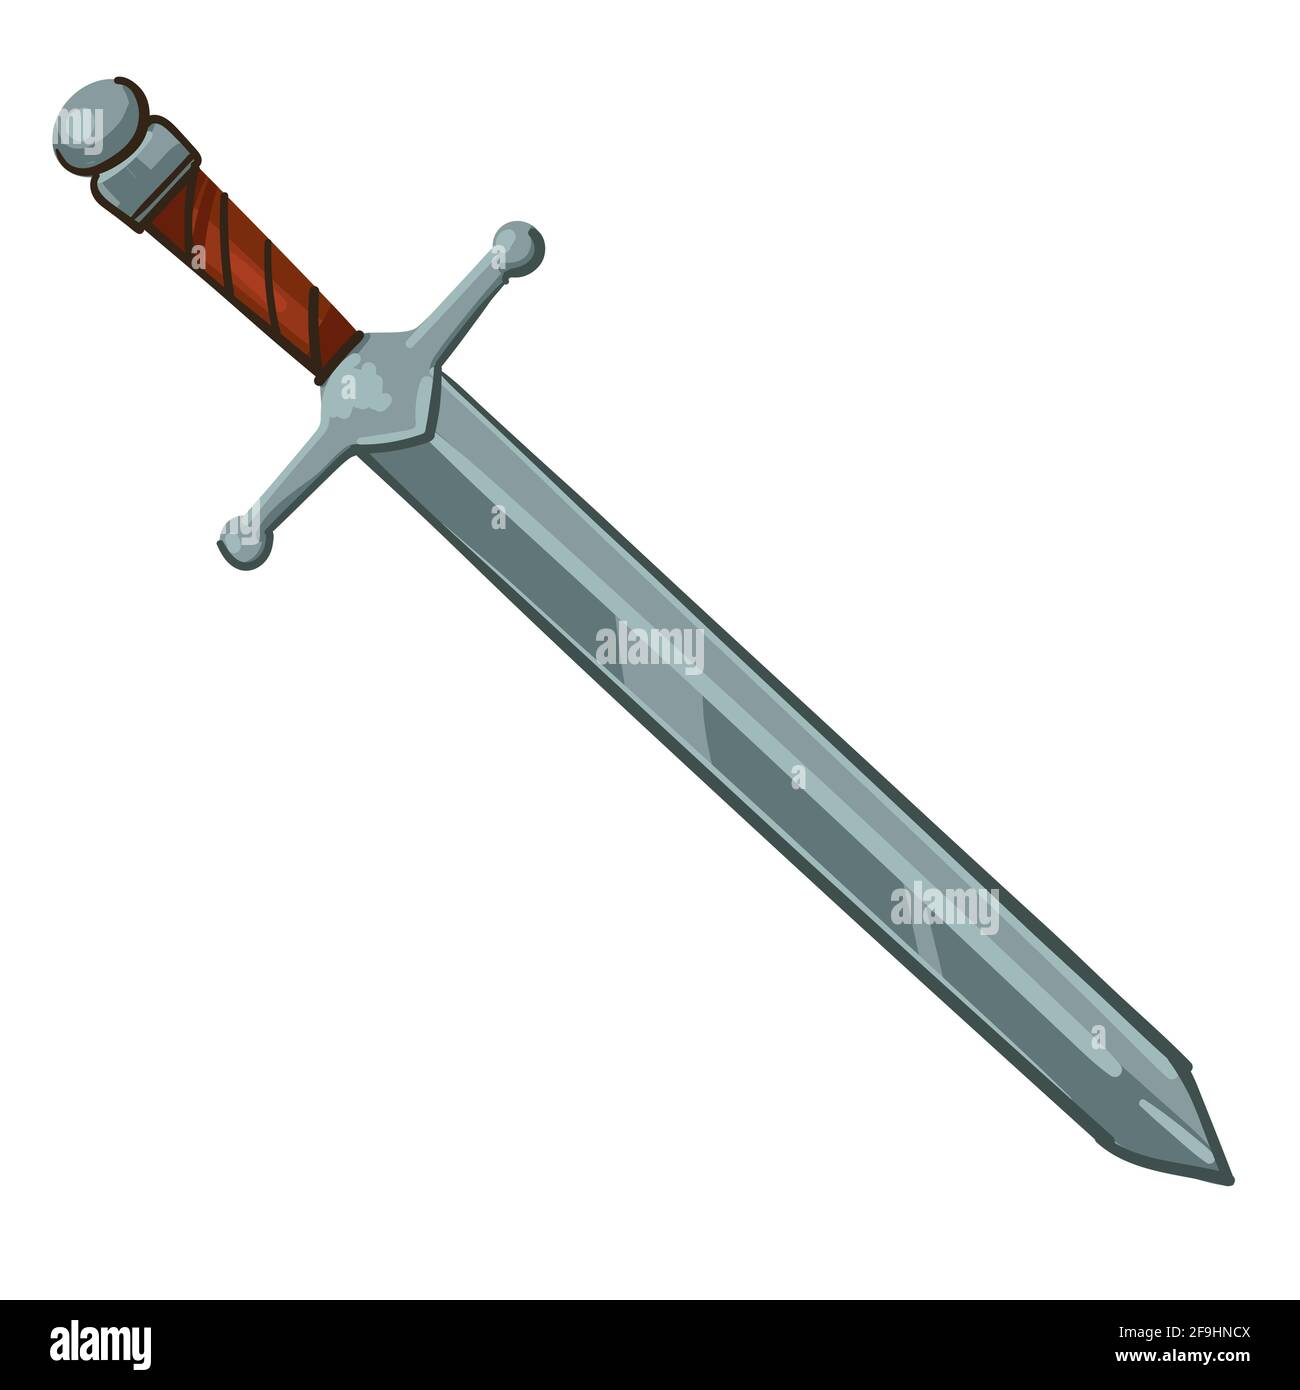 Sword of ancient times, medieval weapon vector Stock Vector